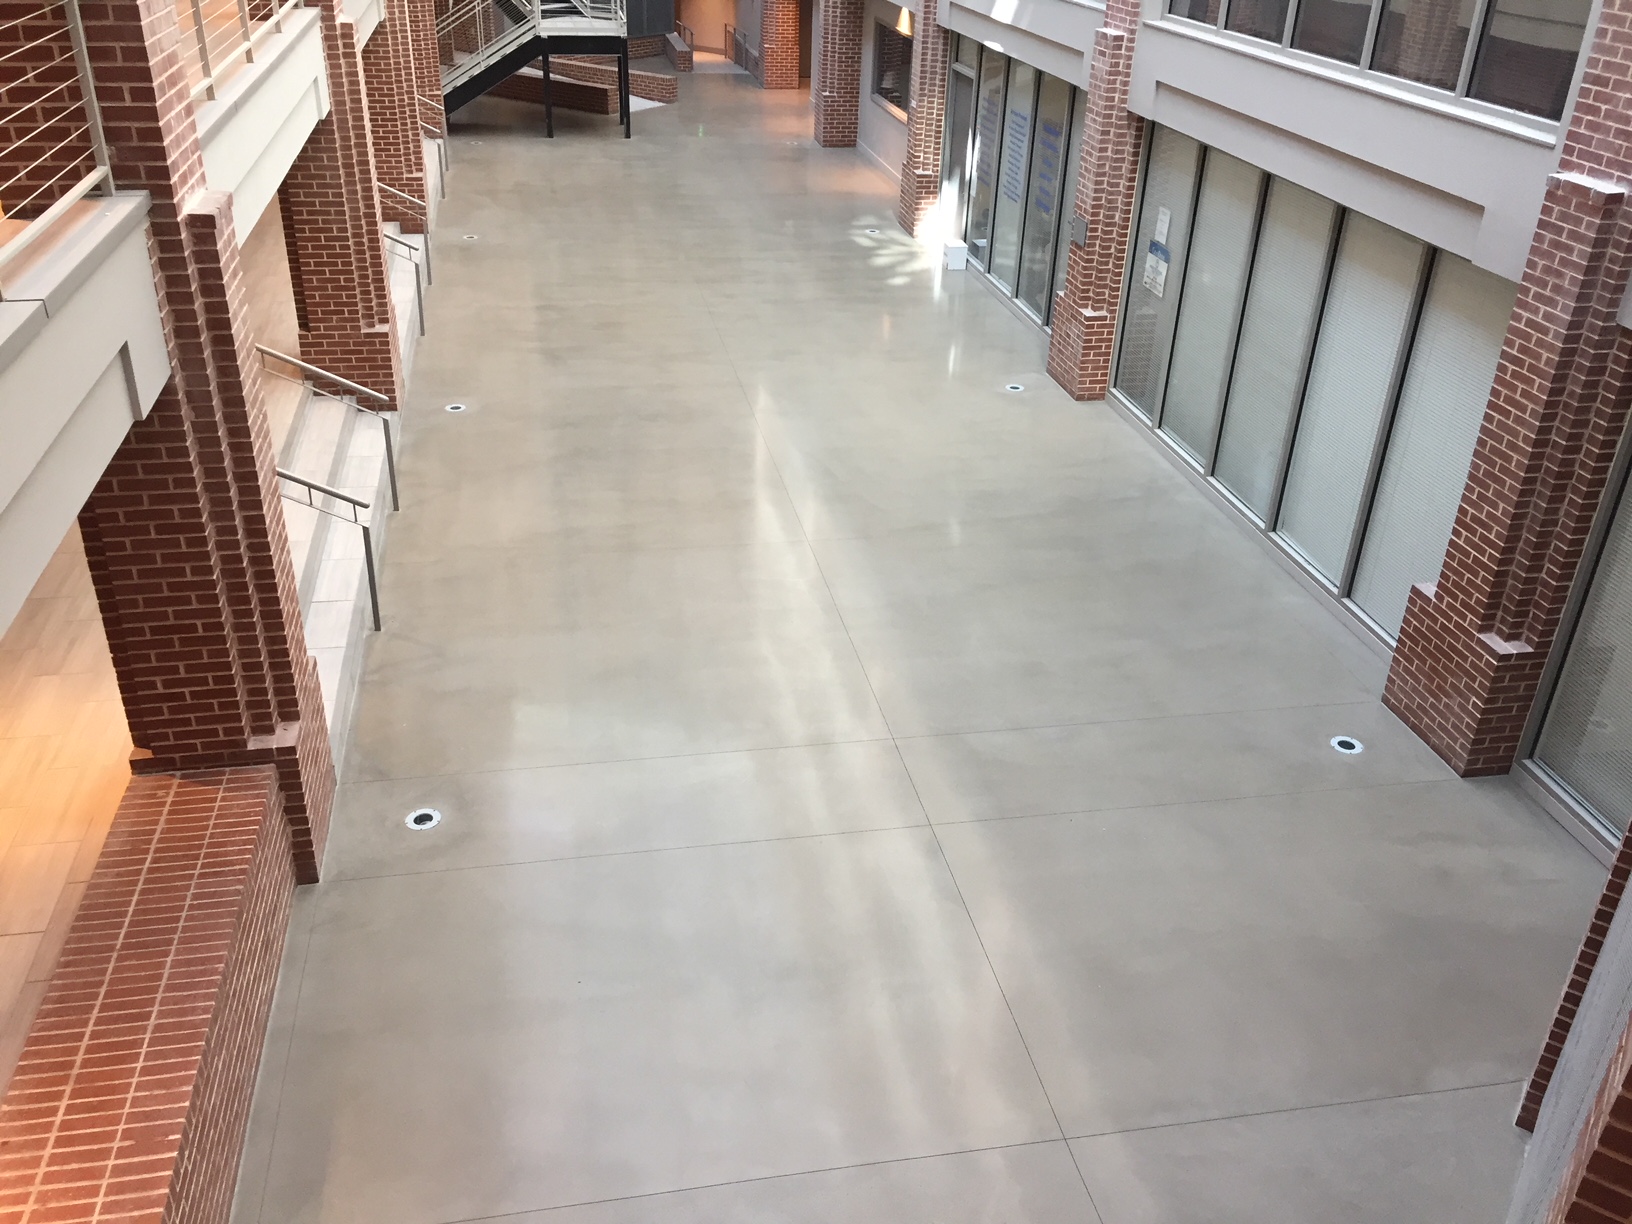 Gray is Good: The “Penetron Self-Leveling Topping Workshop” taught the correct procedures for polishing, densifying and sealing the RENEW WS flooring overlay – for a bright, glossy finish.